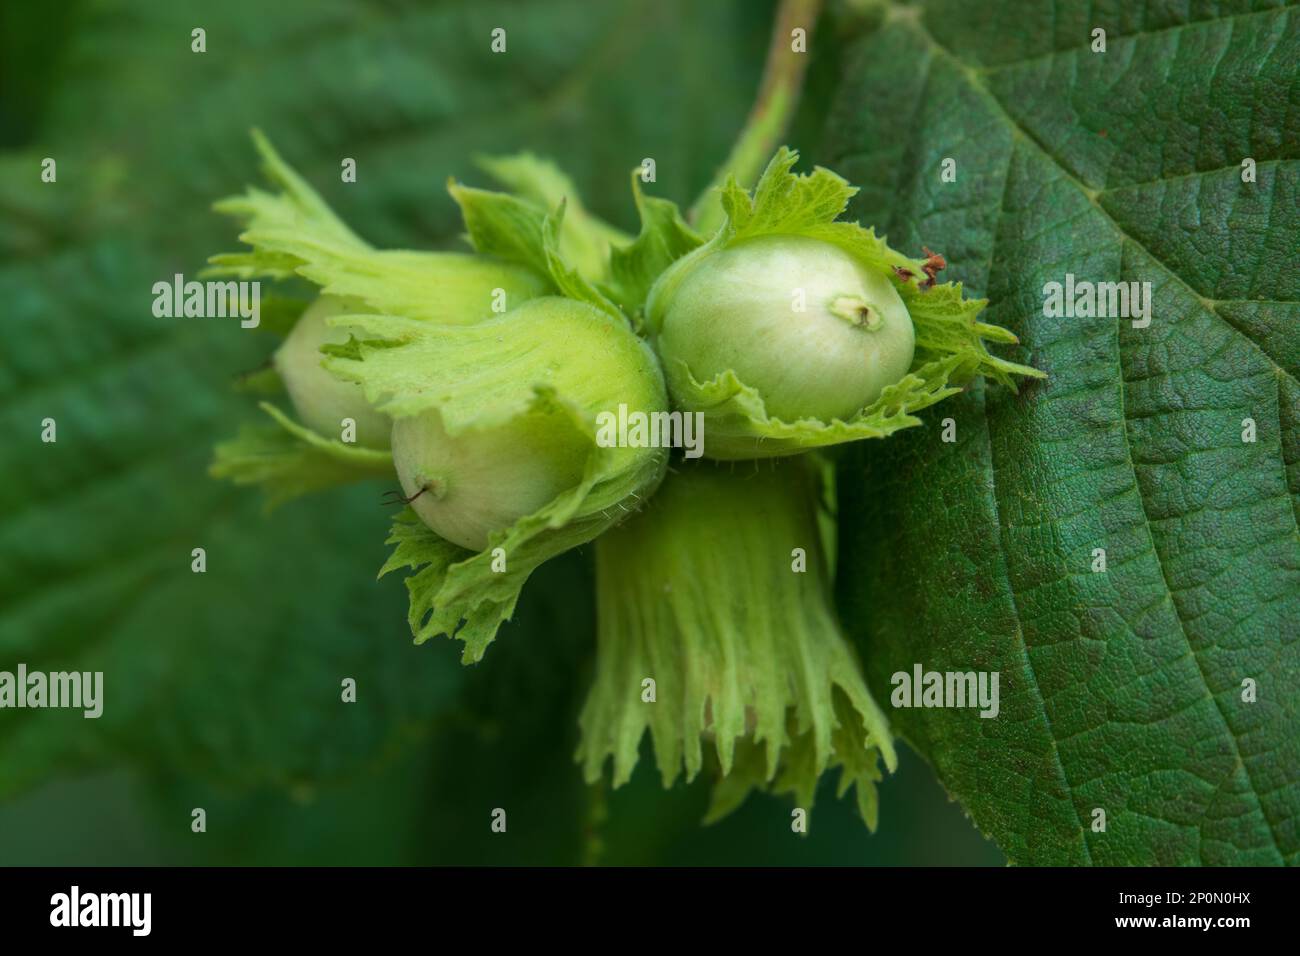 Young hazelnuts growing on the branch. Birth of popular kernel snack Stock Photo